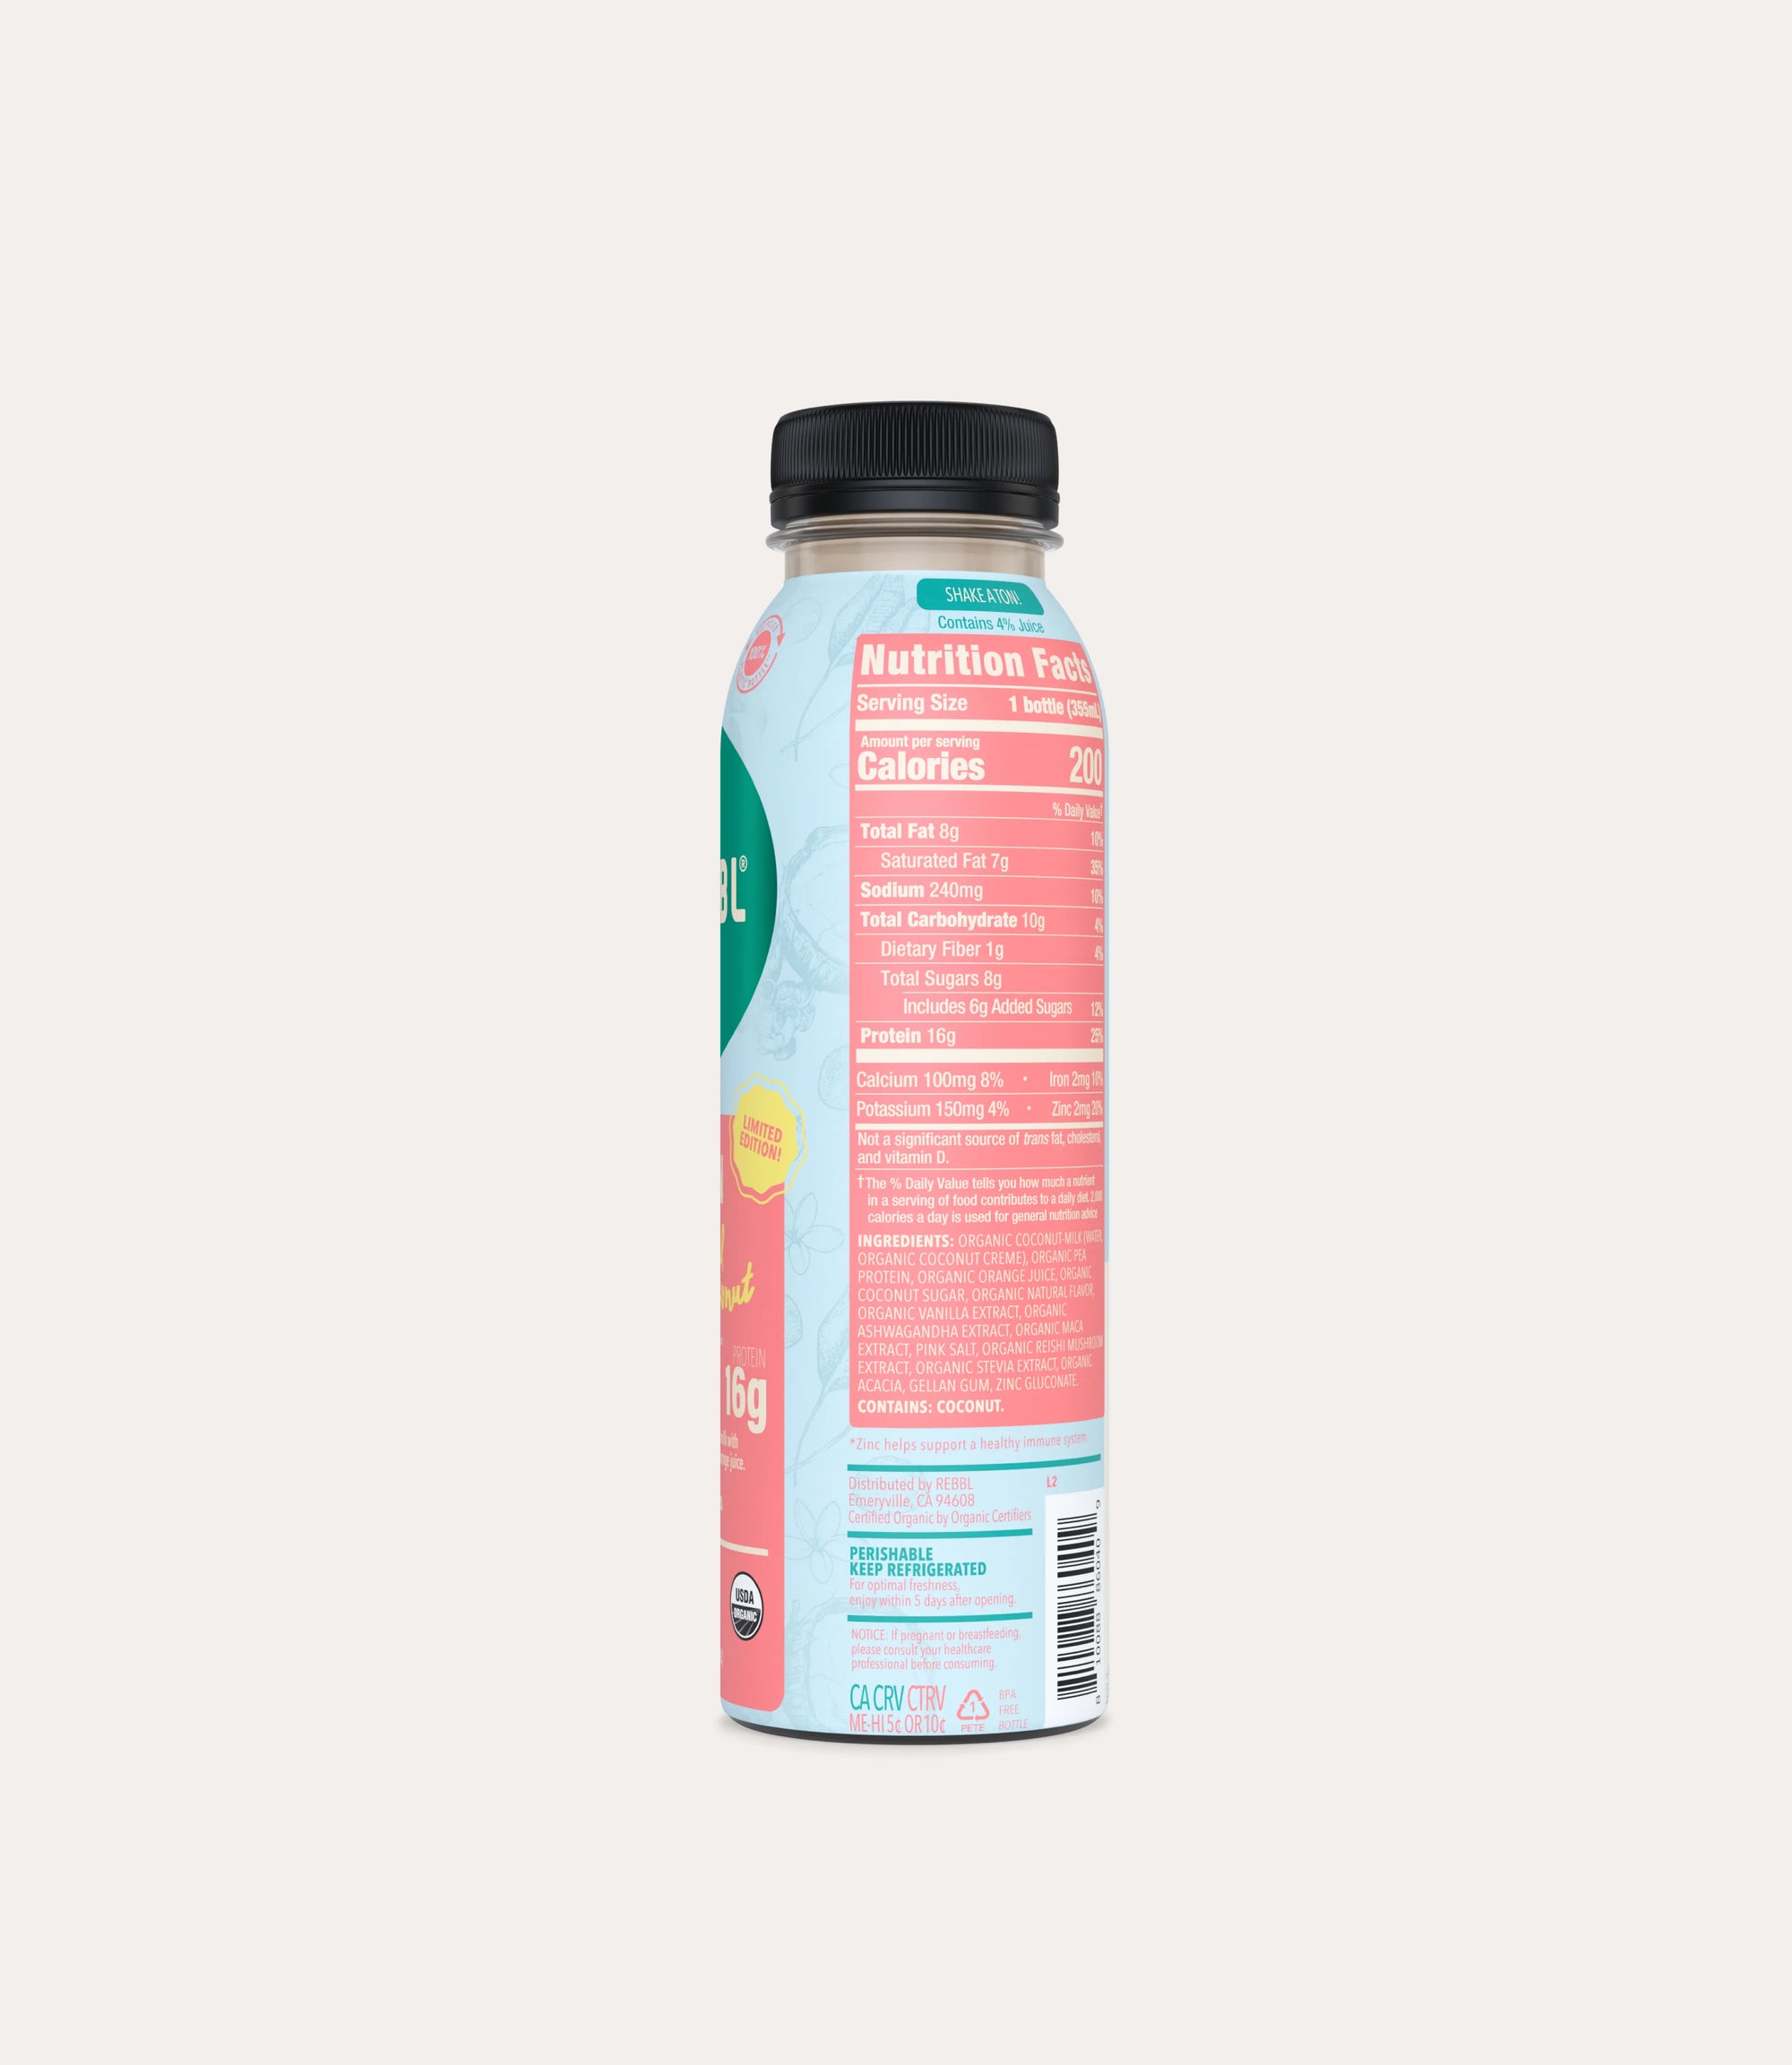 Protein Tropical Coconut